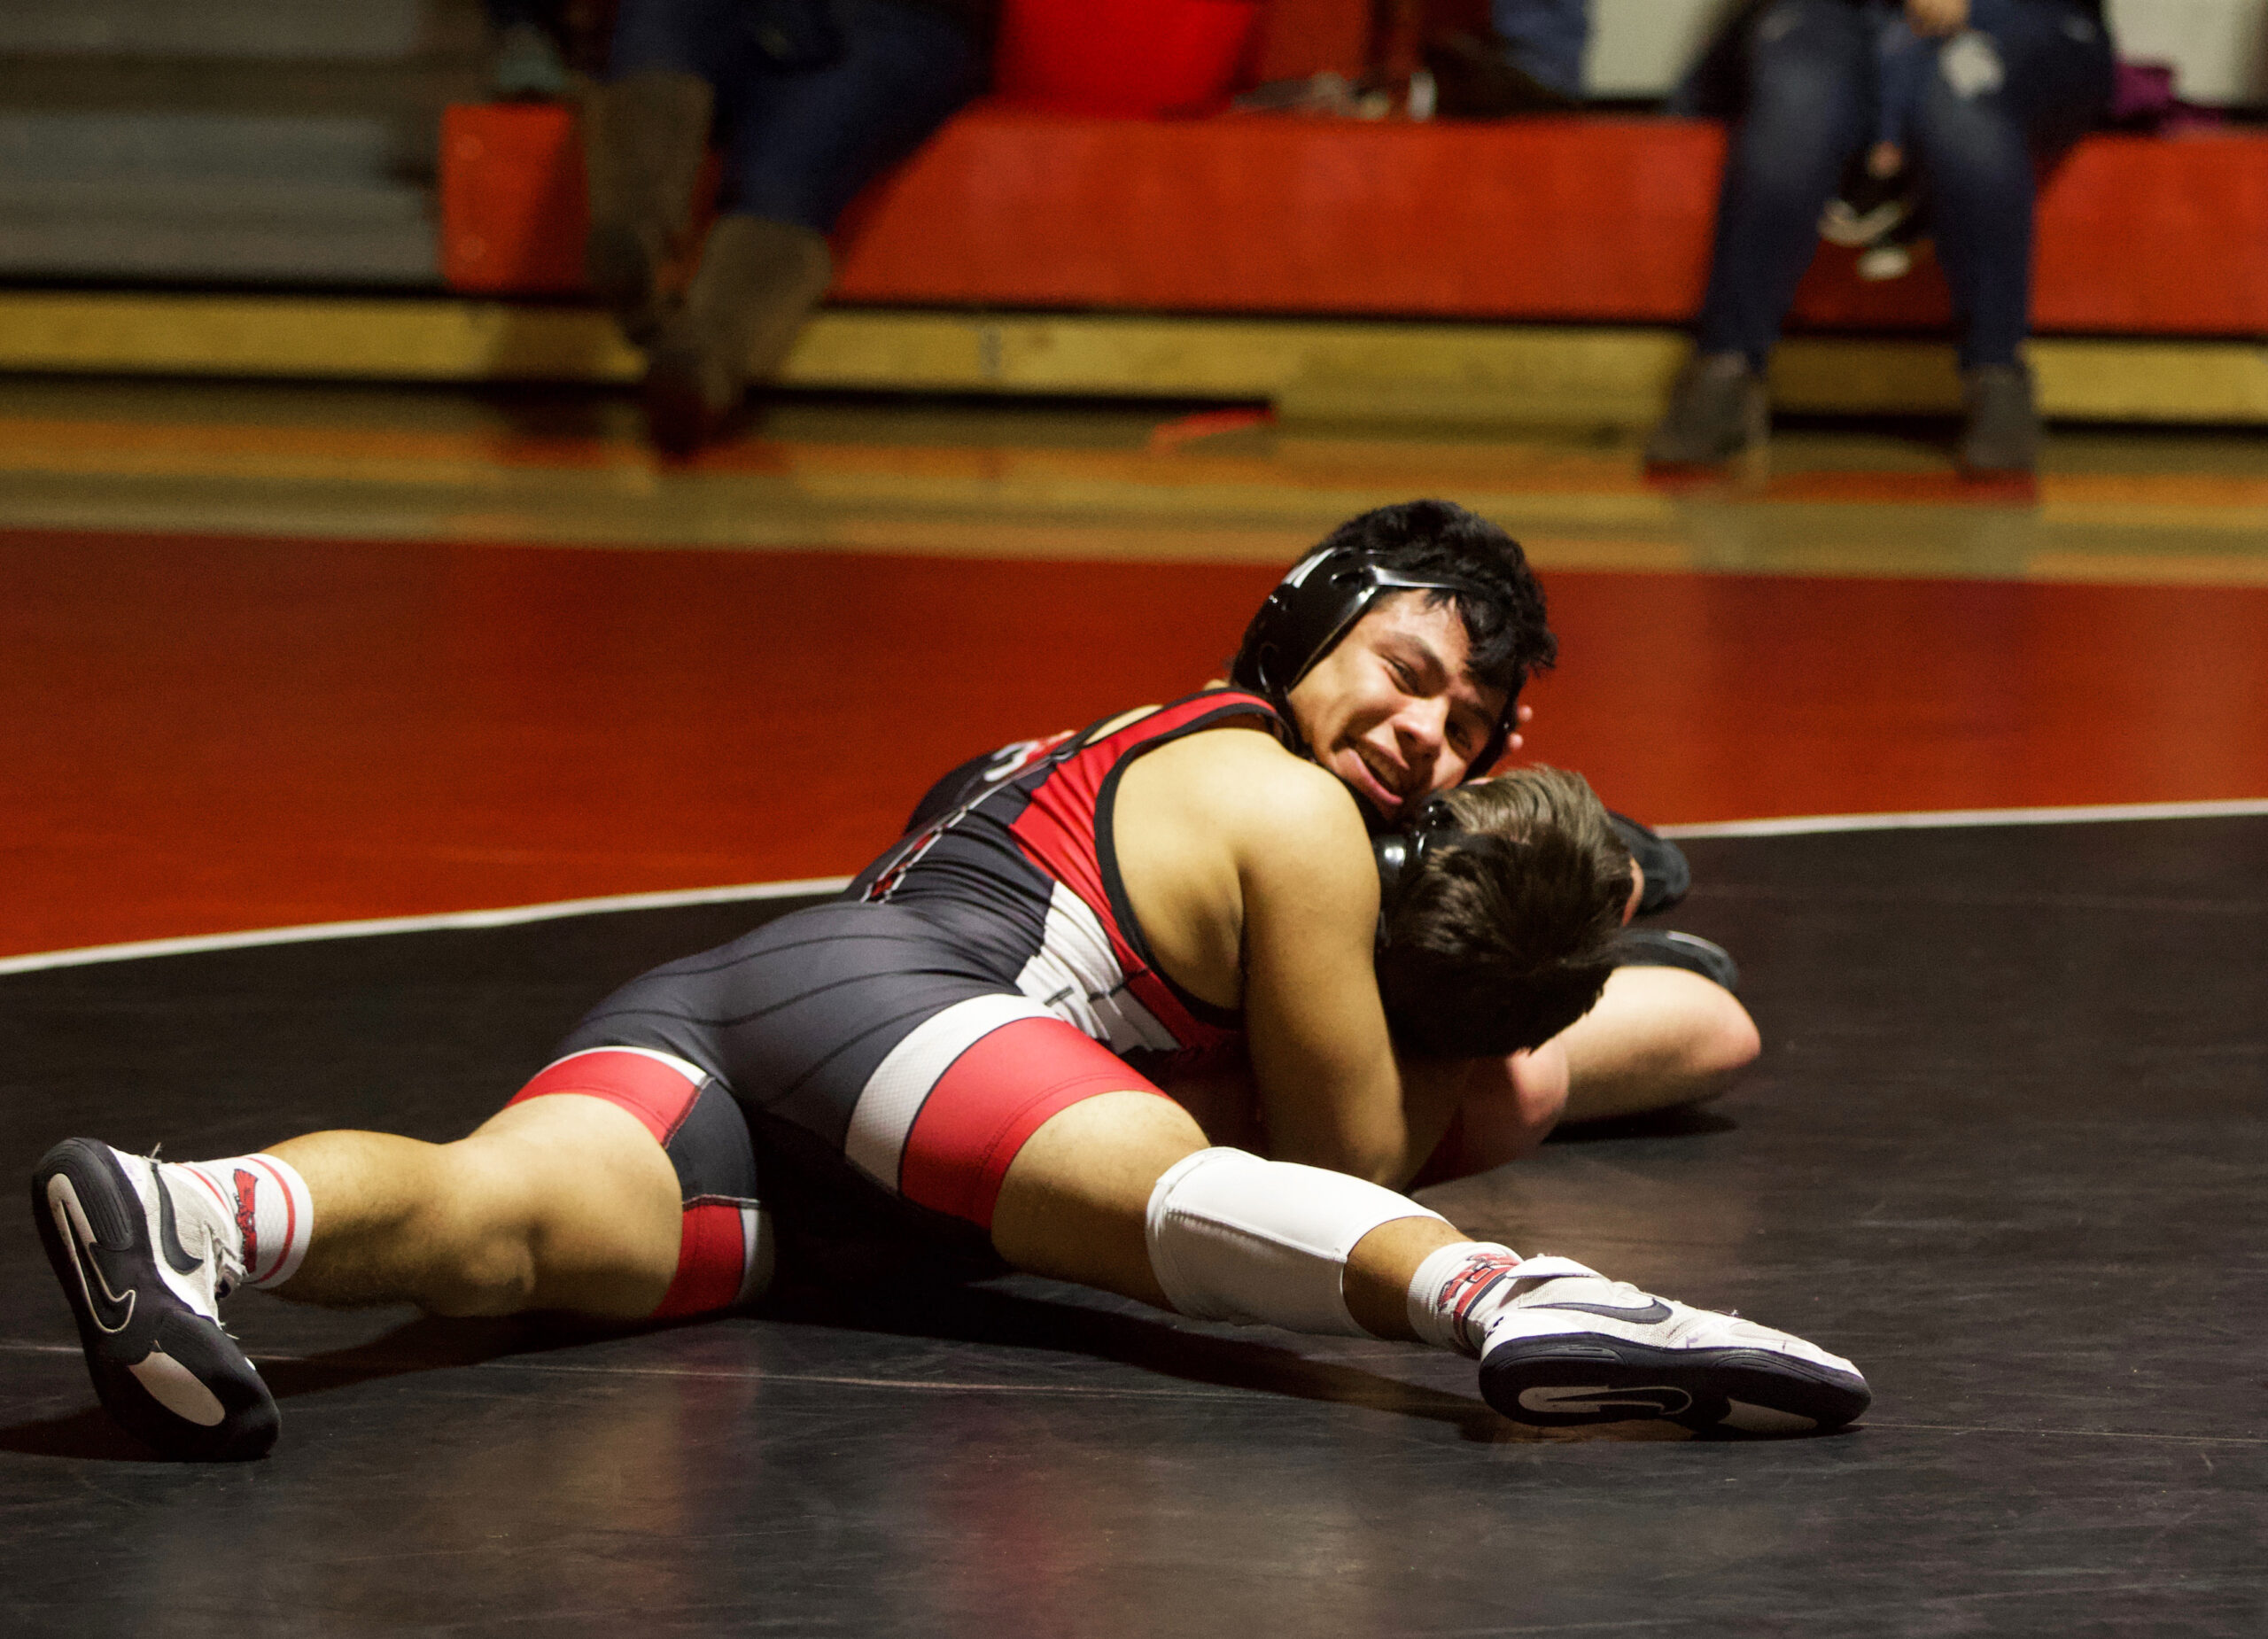 Injuries don’t Stop Wrestlers from Trying to Fight